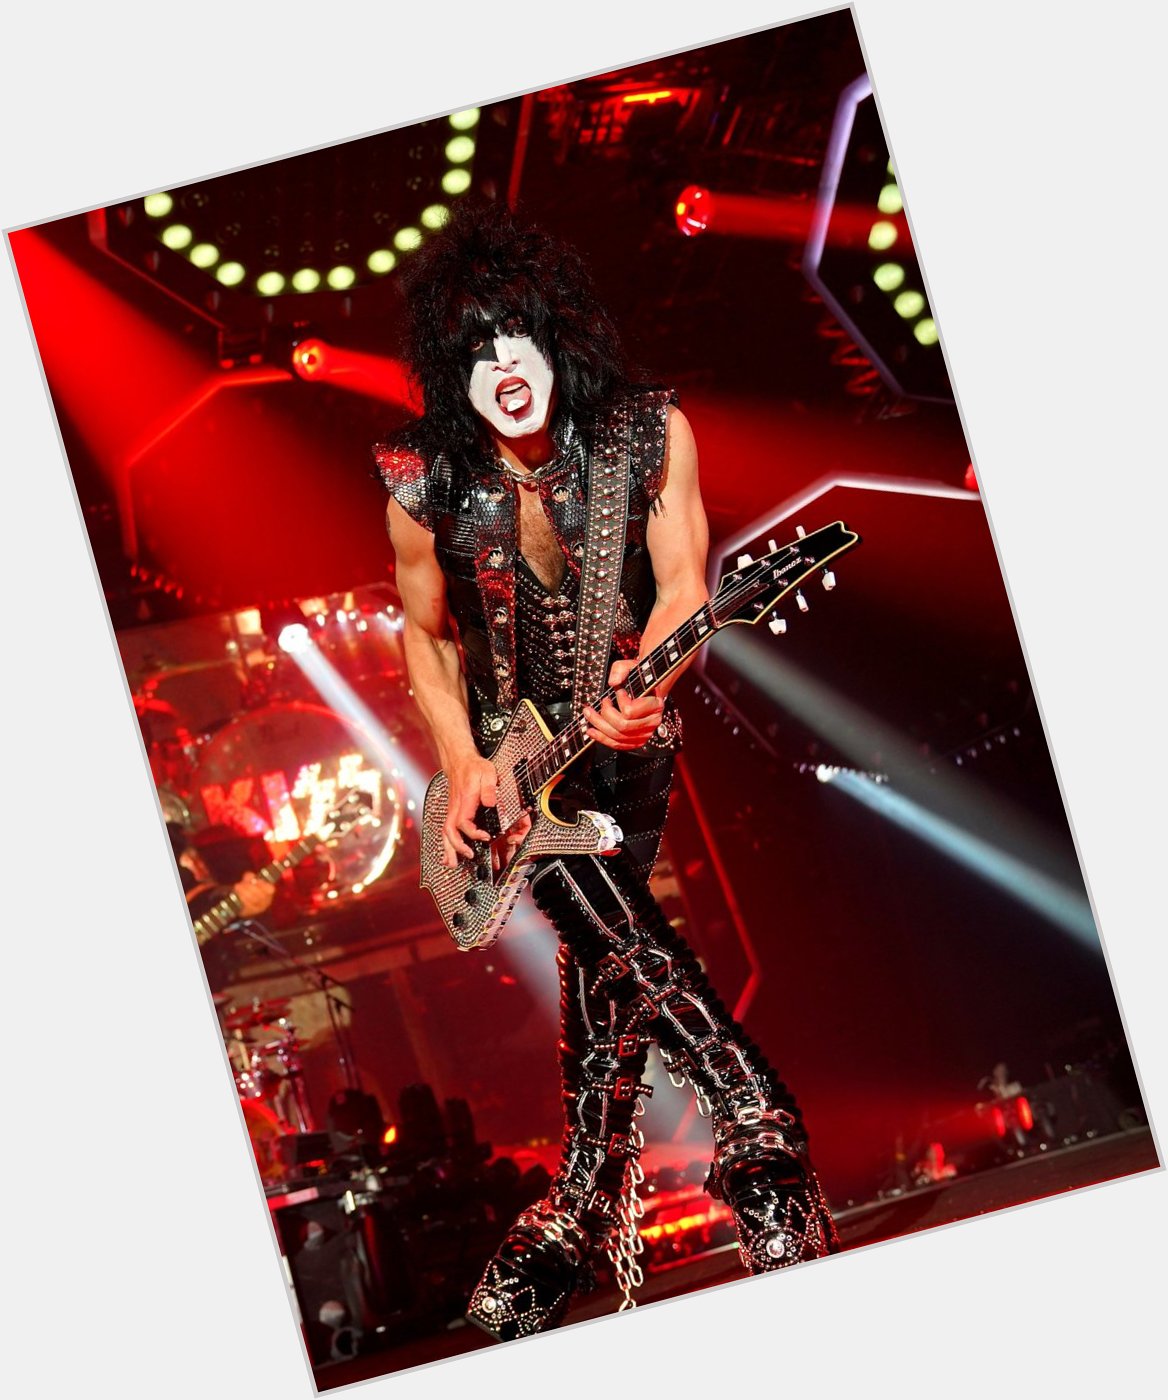 Happy 68th Birthday to Paul Stanley of KISS, born this day in
Manhattan, New York, NY. 